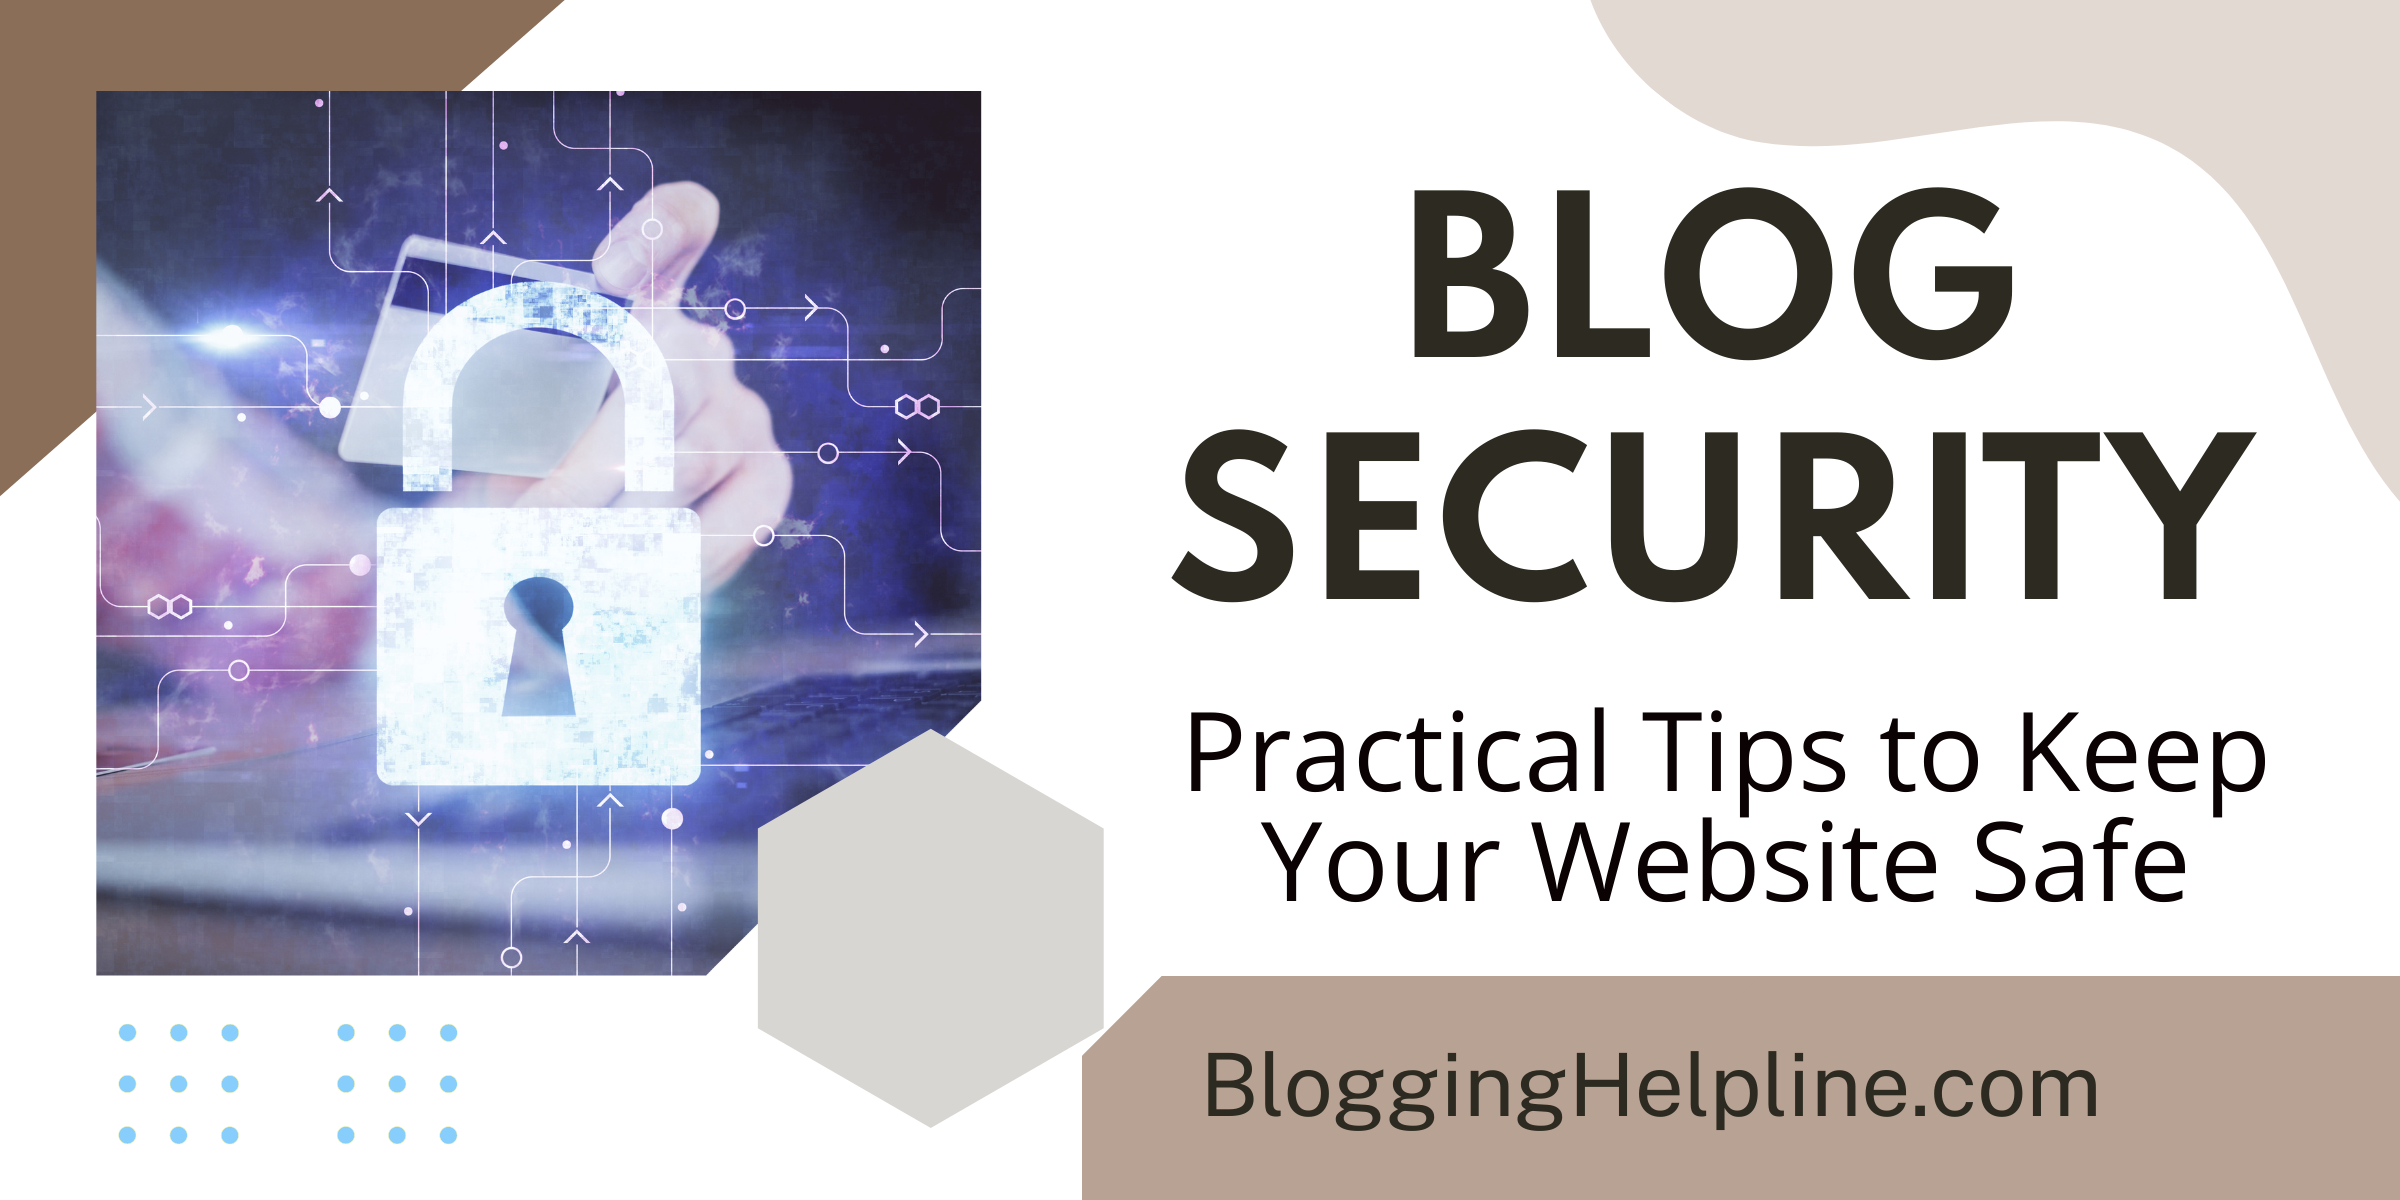 Blog Security Practical Tips to Keep Your Website Safe